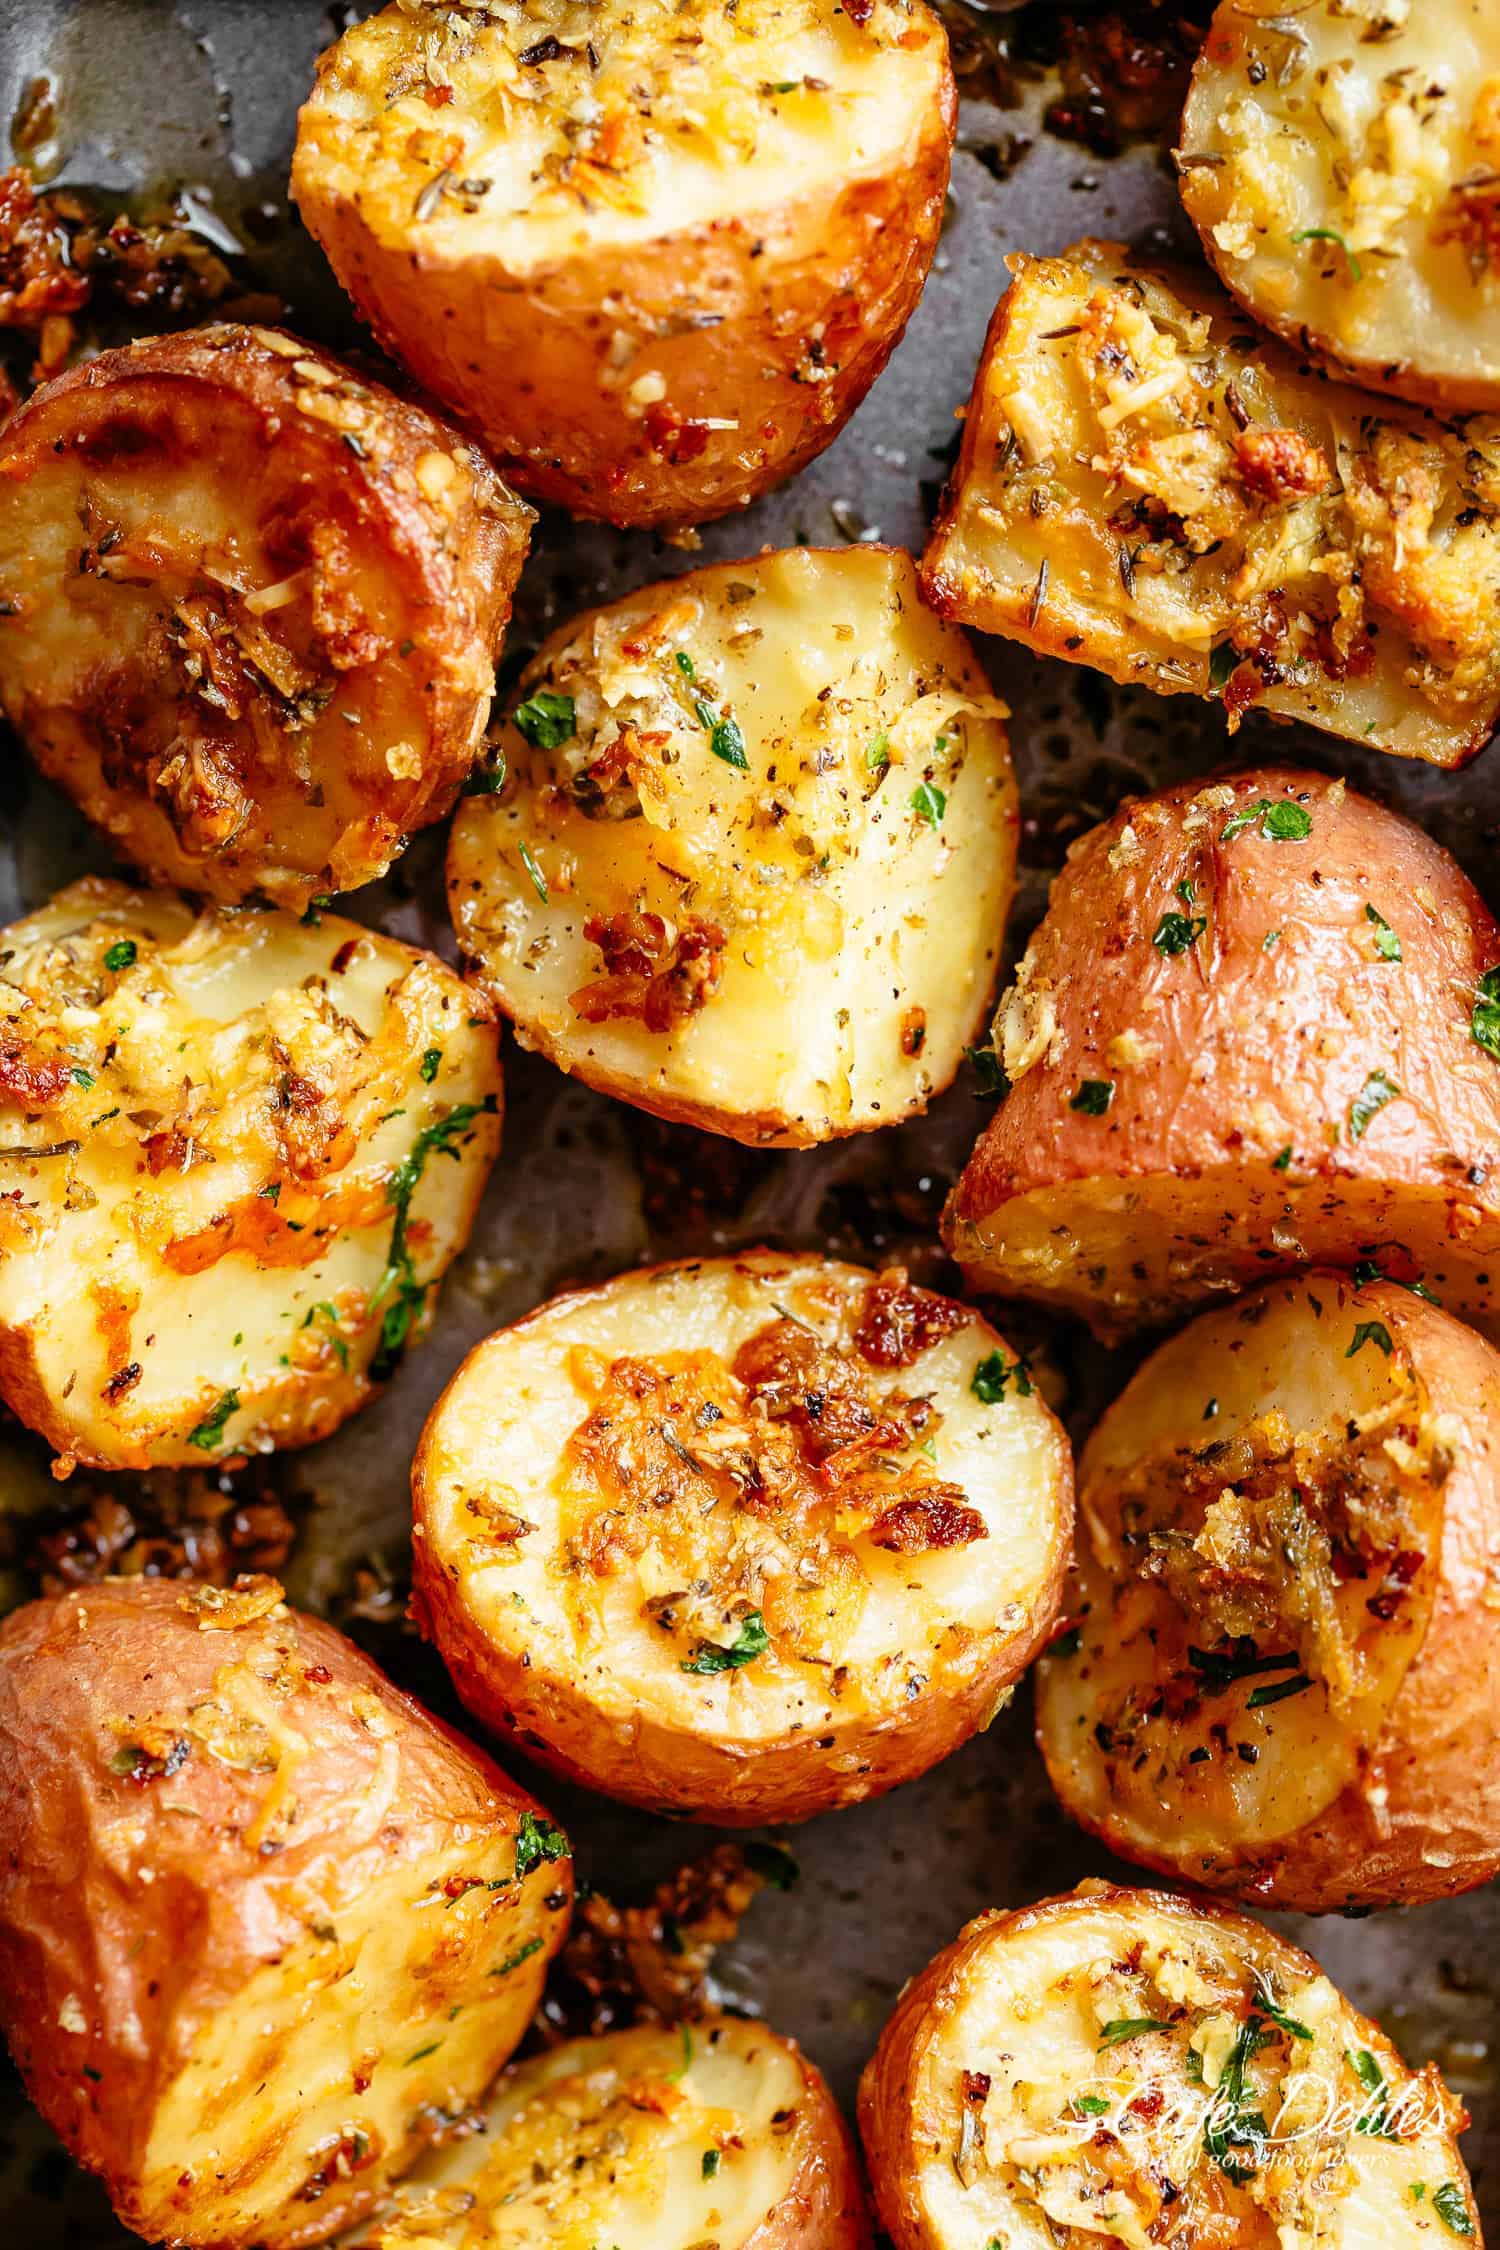 Sierra recommend best of Asian roasted potatoes